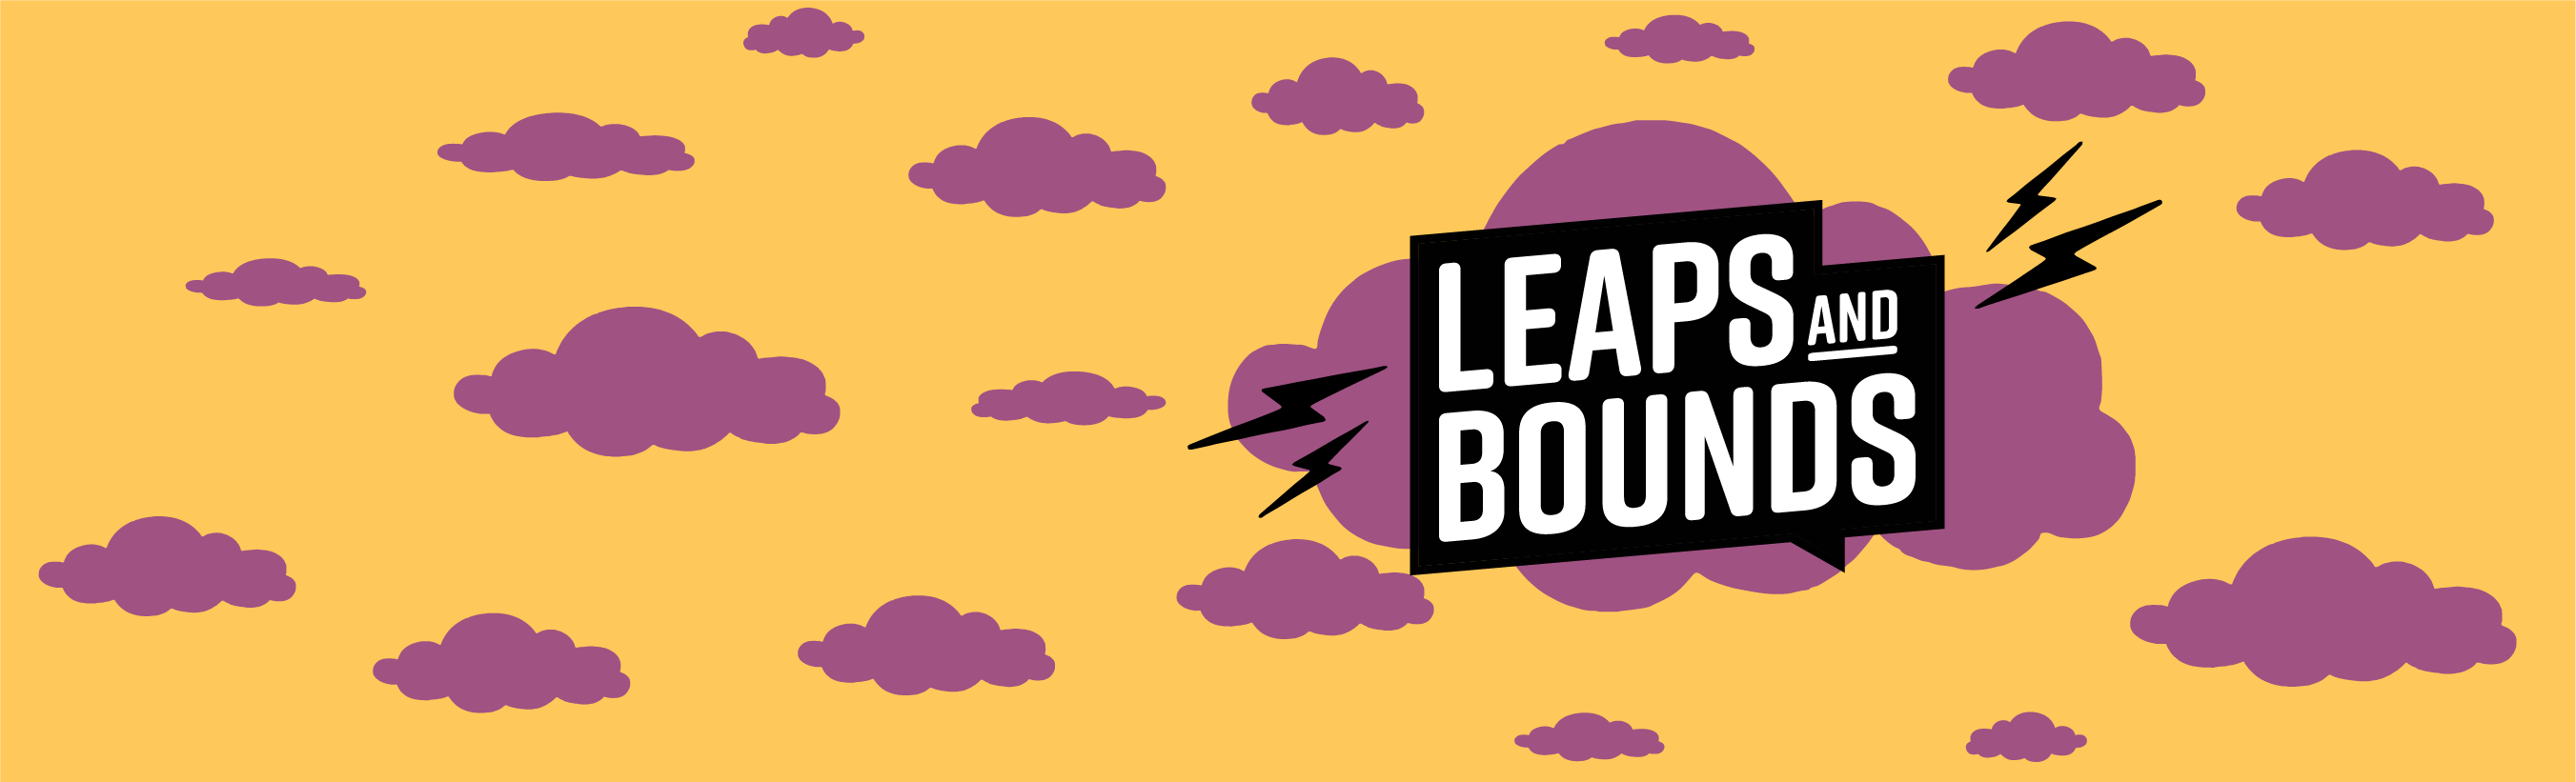 An orange background with purple clouds. There is a leaps and Bounds logo on the right side with lightning bolts.